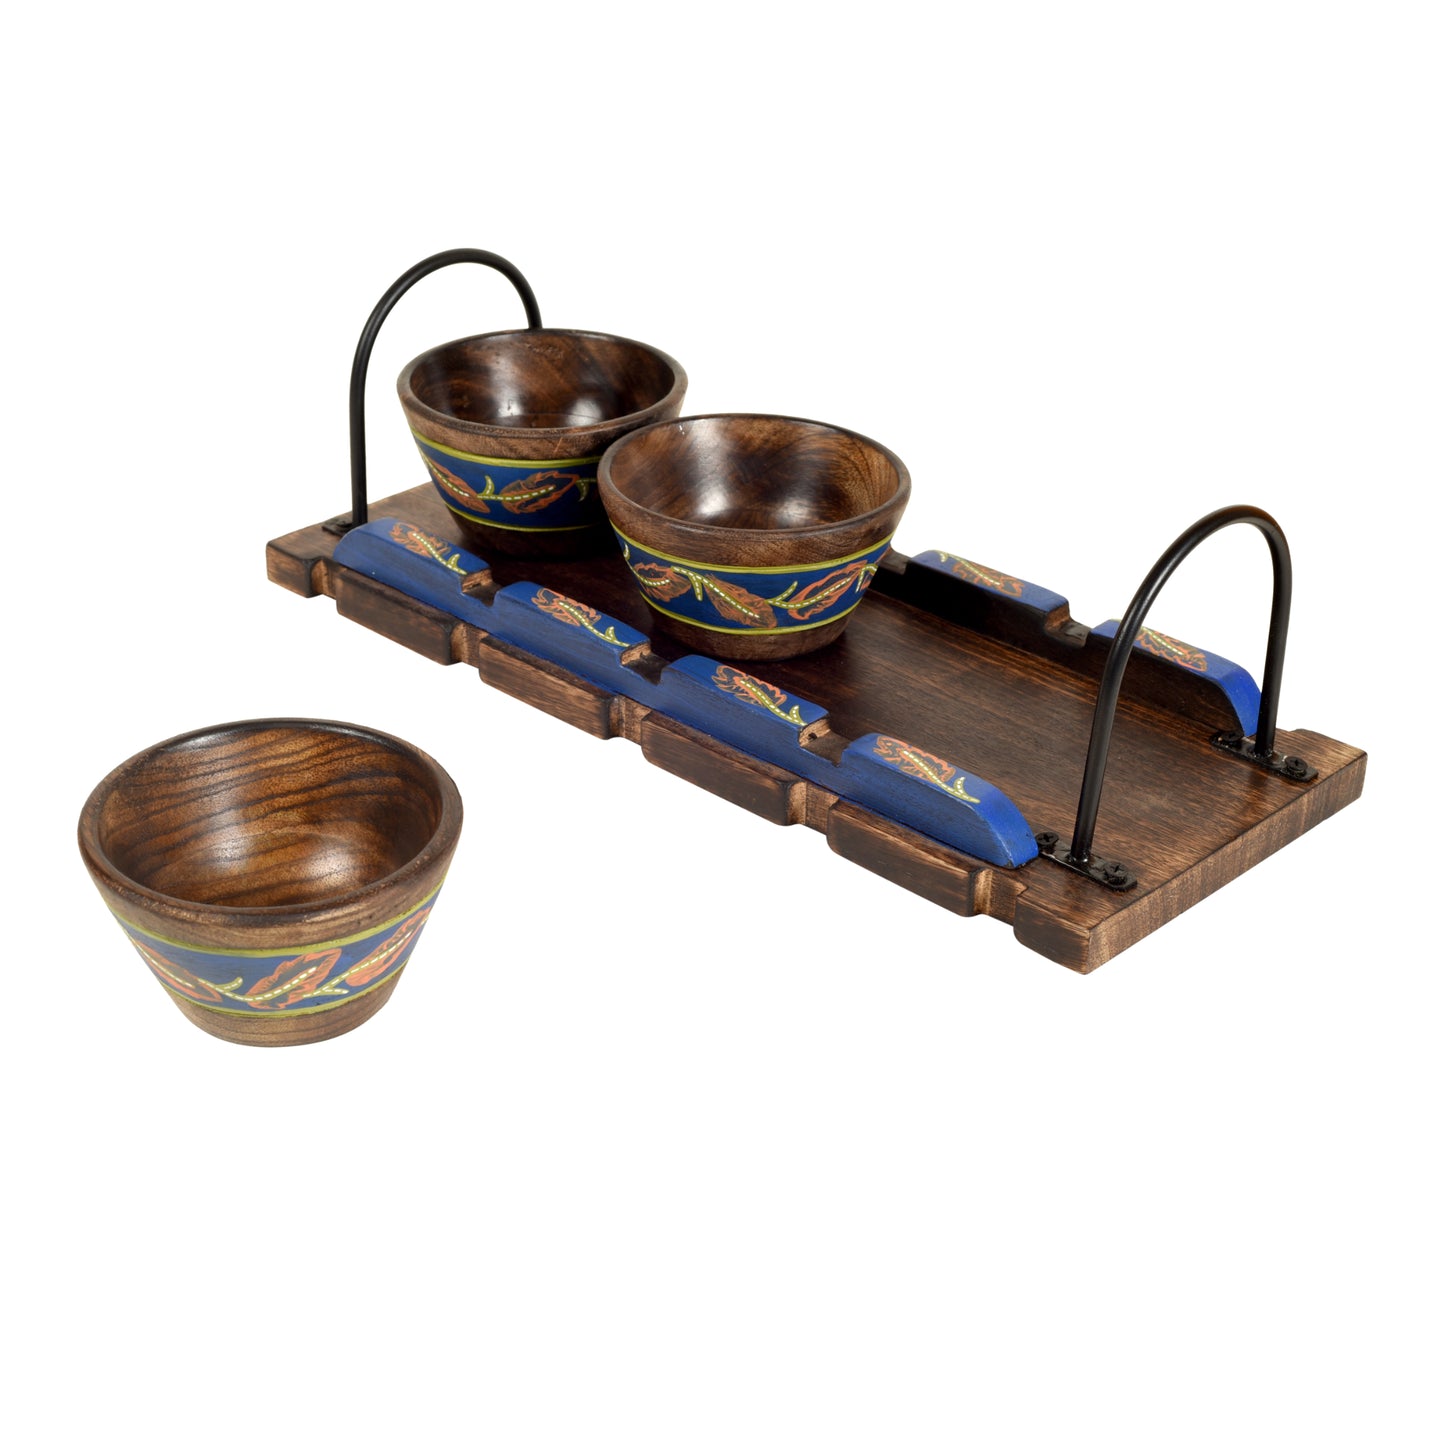 Wooden Bowls & Tray Hand-painted, Metal Handles